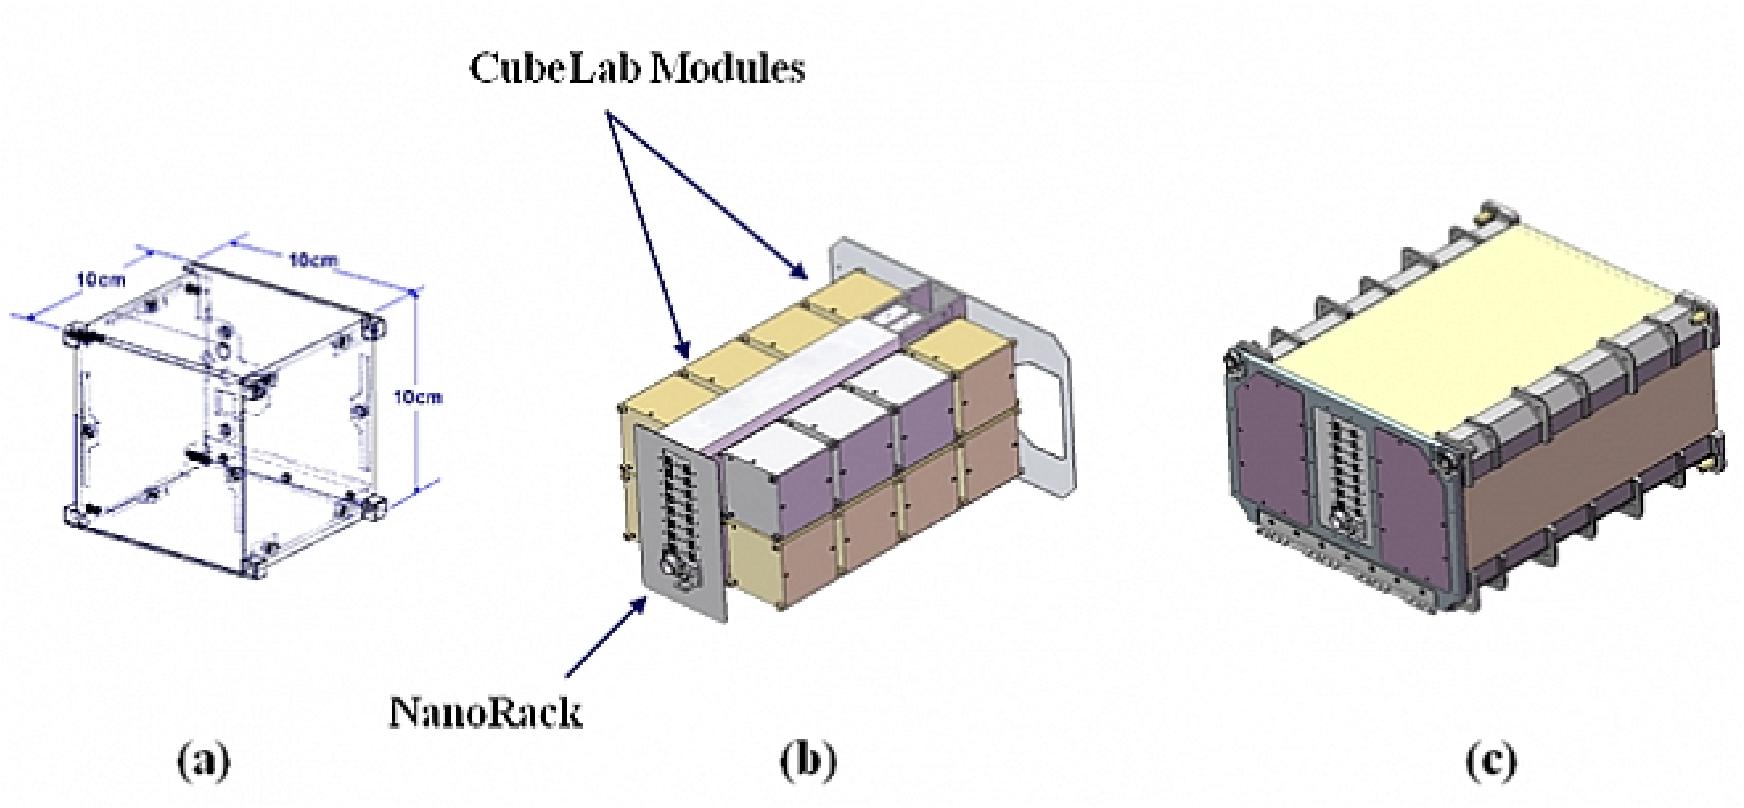 Figure 42: Illustration of (a) the CubeLab form factor, (b) a NanoRack with CubeLab module, (c) EXPRESS Rack locker (image credit: Kentucky Space)